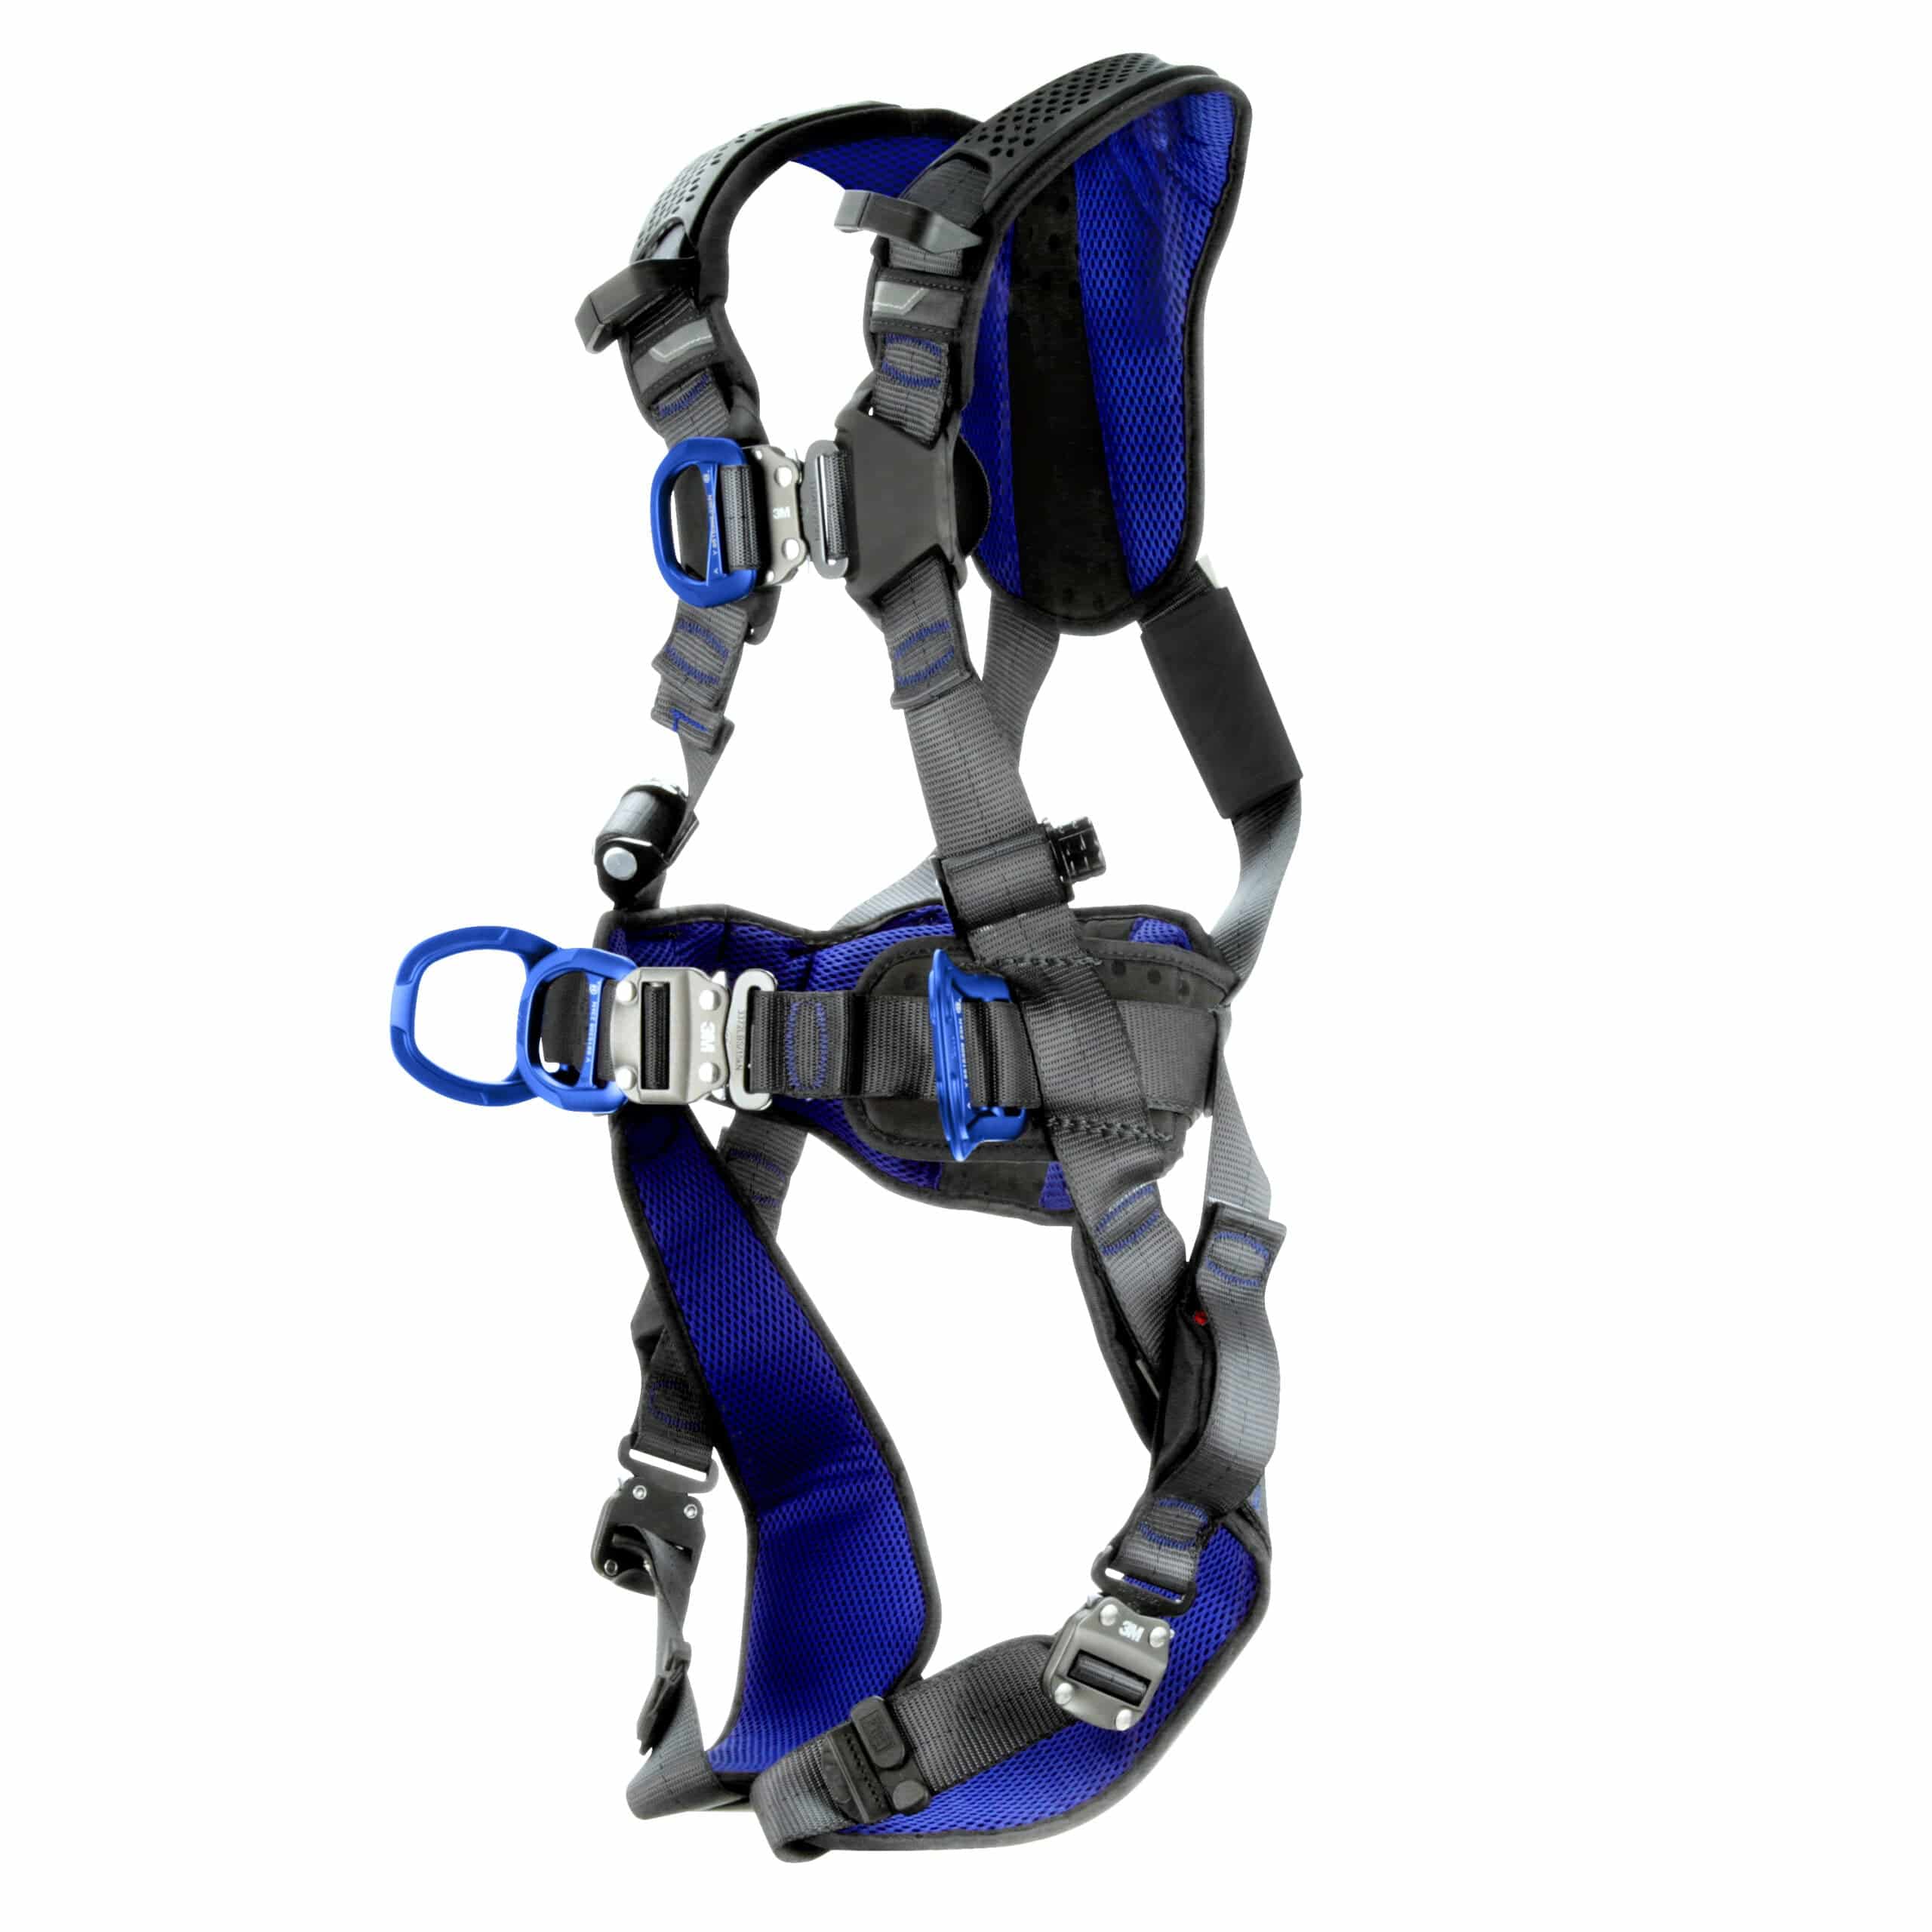 3M DBI SALA ExoFit XE200 Quick Connect Comfort Positioning Safety Harness with Front Belt D-Ring - SecureHeights